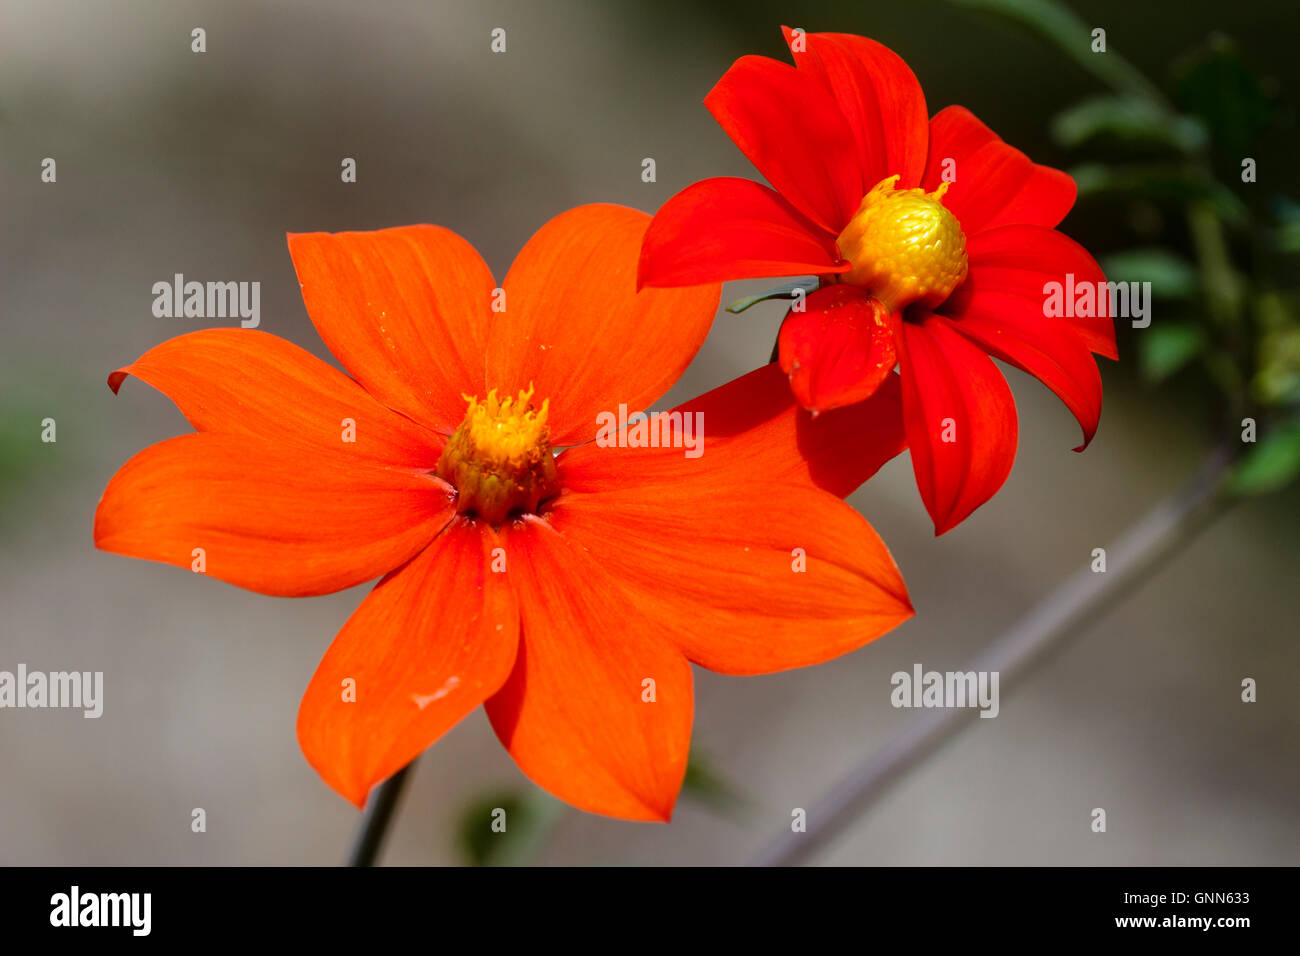 Intense red-orange late summer flowers of the Mexican species Dahlia coccinea var. palmeri Stock Photo